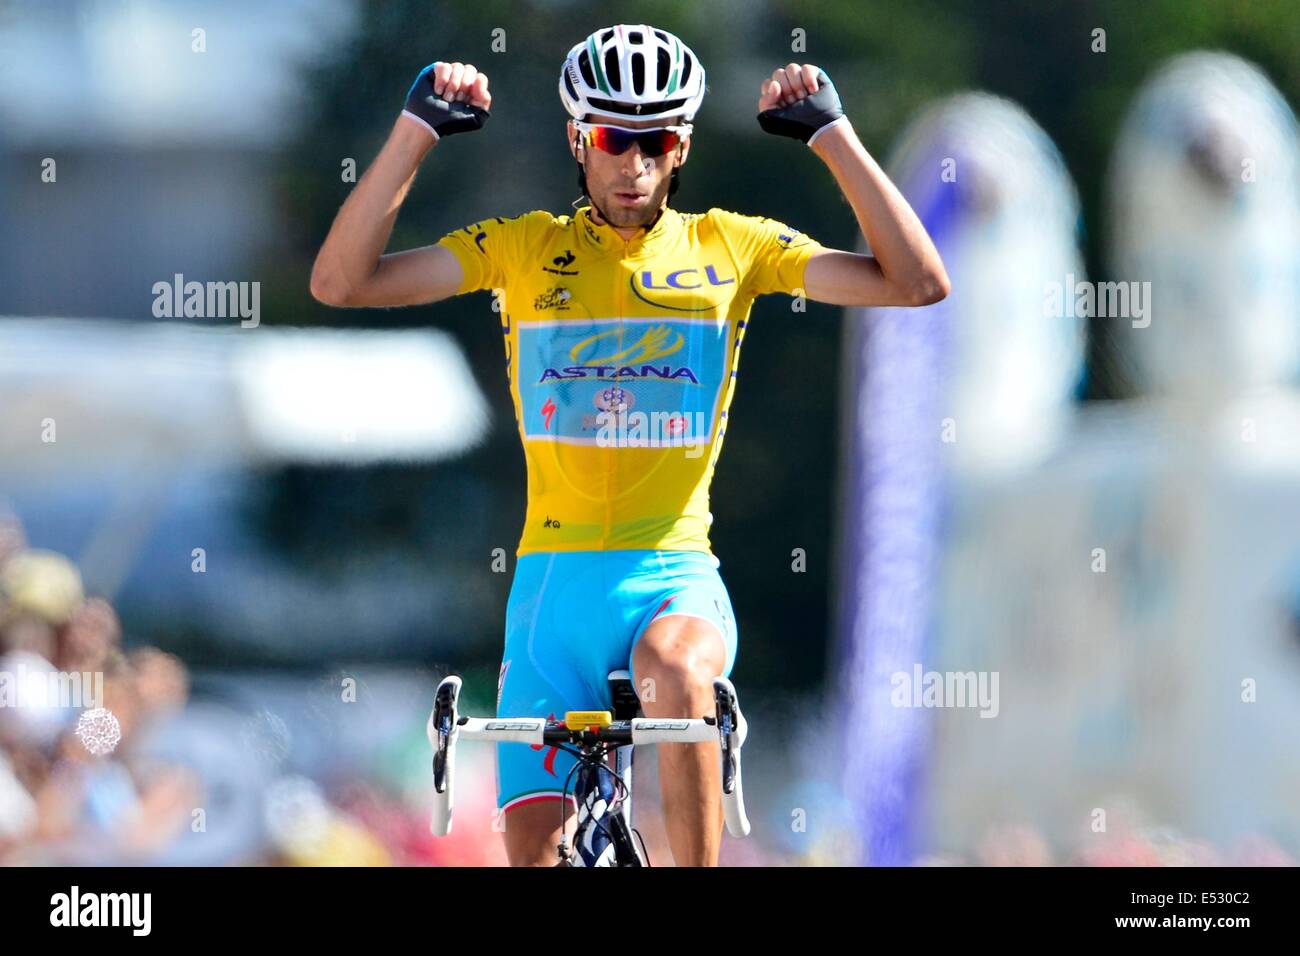 18.07.2014. St Etienne to Chamrousse, France. Tour de France Cycling Tour, stage 13. NIBALI Vincenzo (ITA - Astana Pro team) celebrates the victory during stage 13 Stock Photo